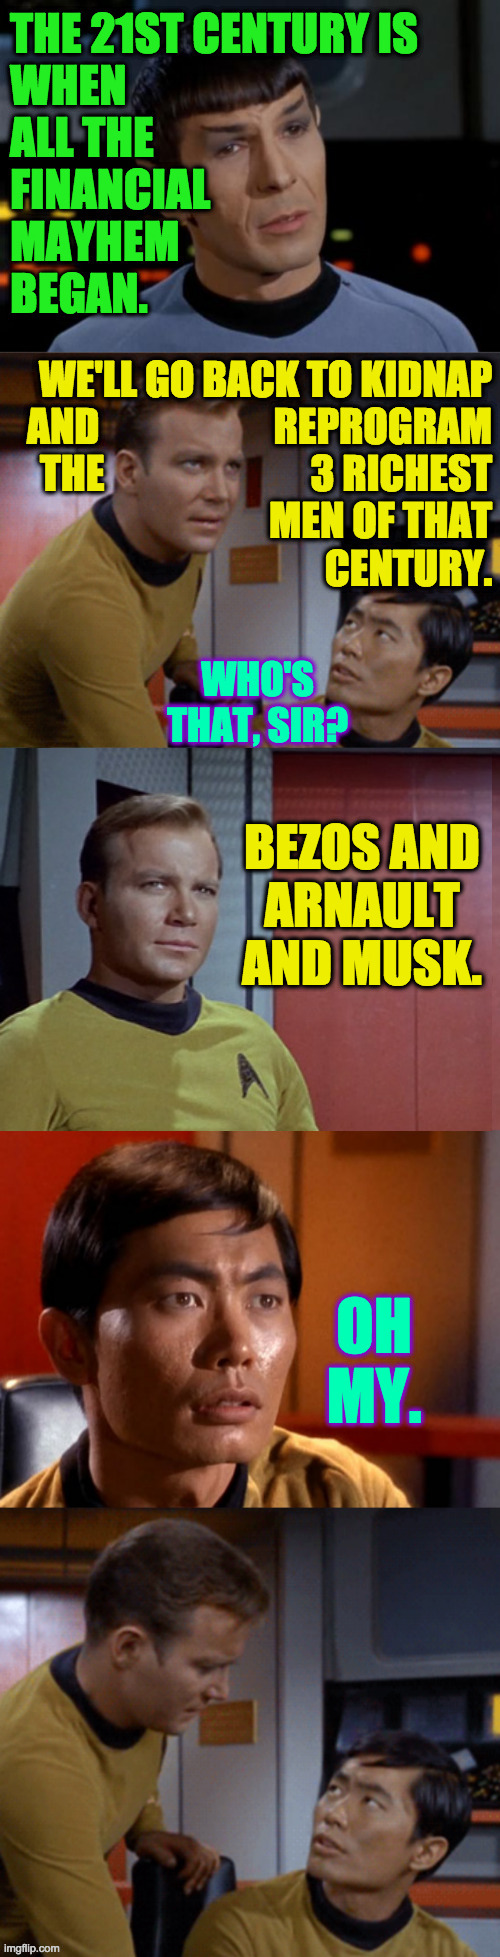 If they've already done it, it wudn't too good a job. | BEZOS AND
ARNAULT
AND MUSK. | image tagged in memes,spock illogical,kirk and sulu,rich people,oh my | made w/ Imgflip meme maker